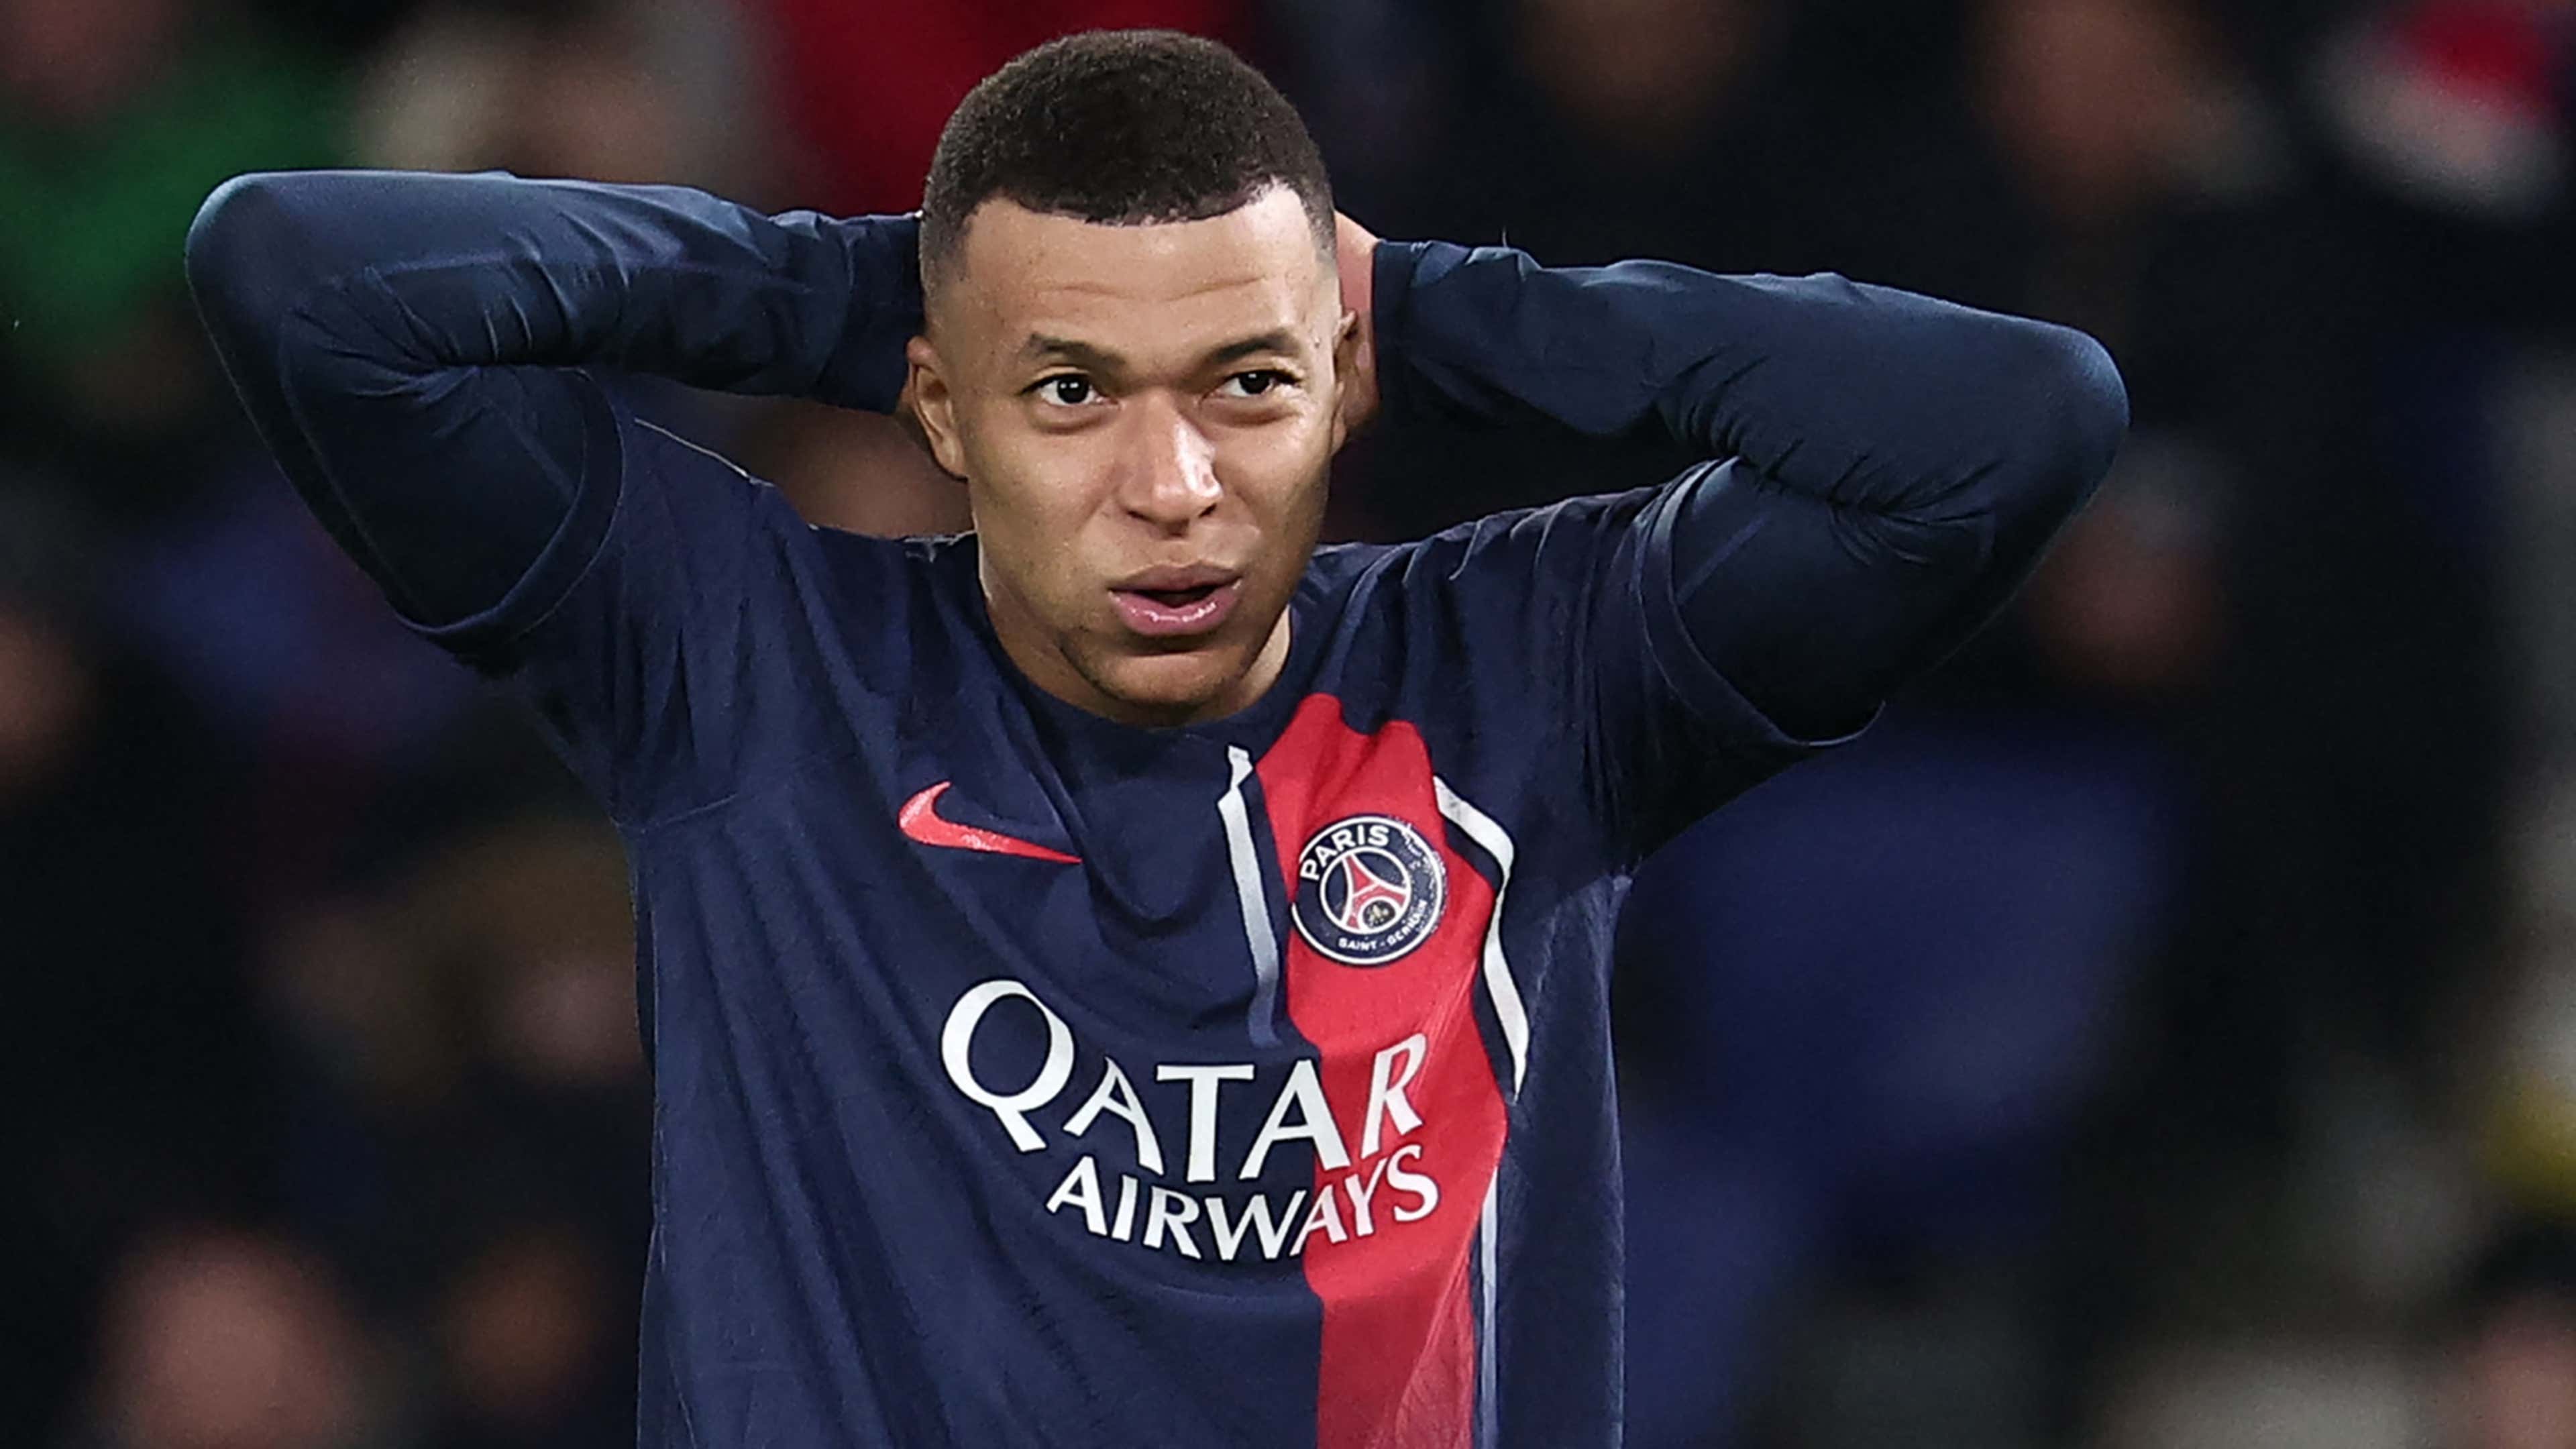 If we could have taken €10 billion, we would have!' - Kylian Mbappe's mother and agent reveals she has 'no guilt' over her son's salary as rumours swirl over his future |